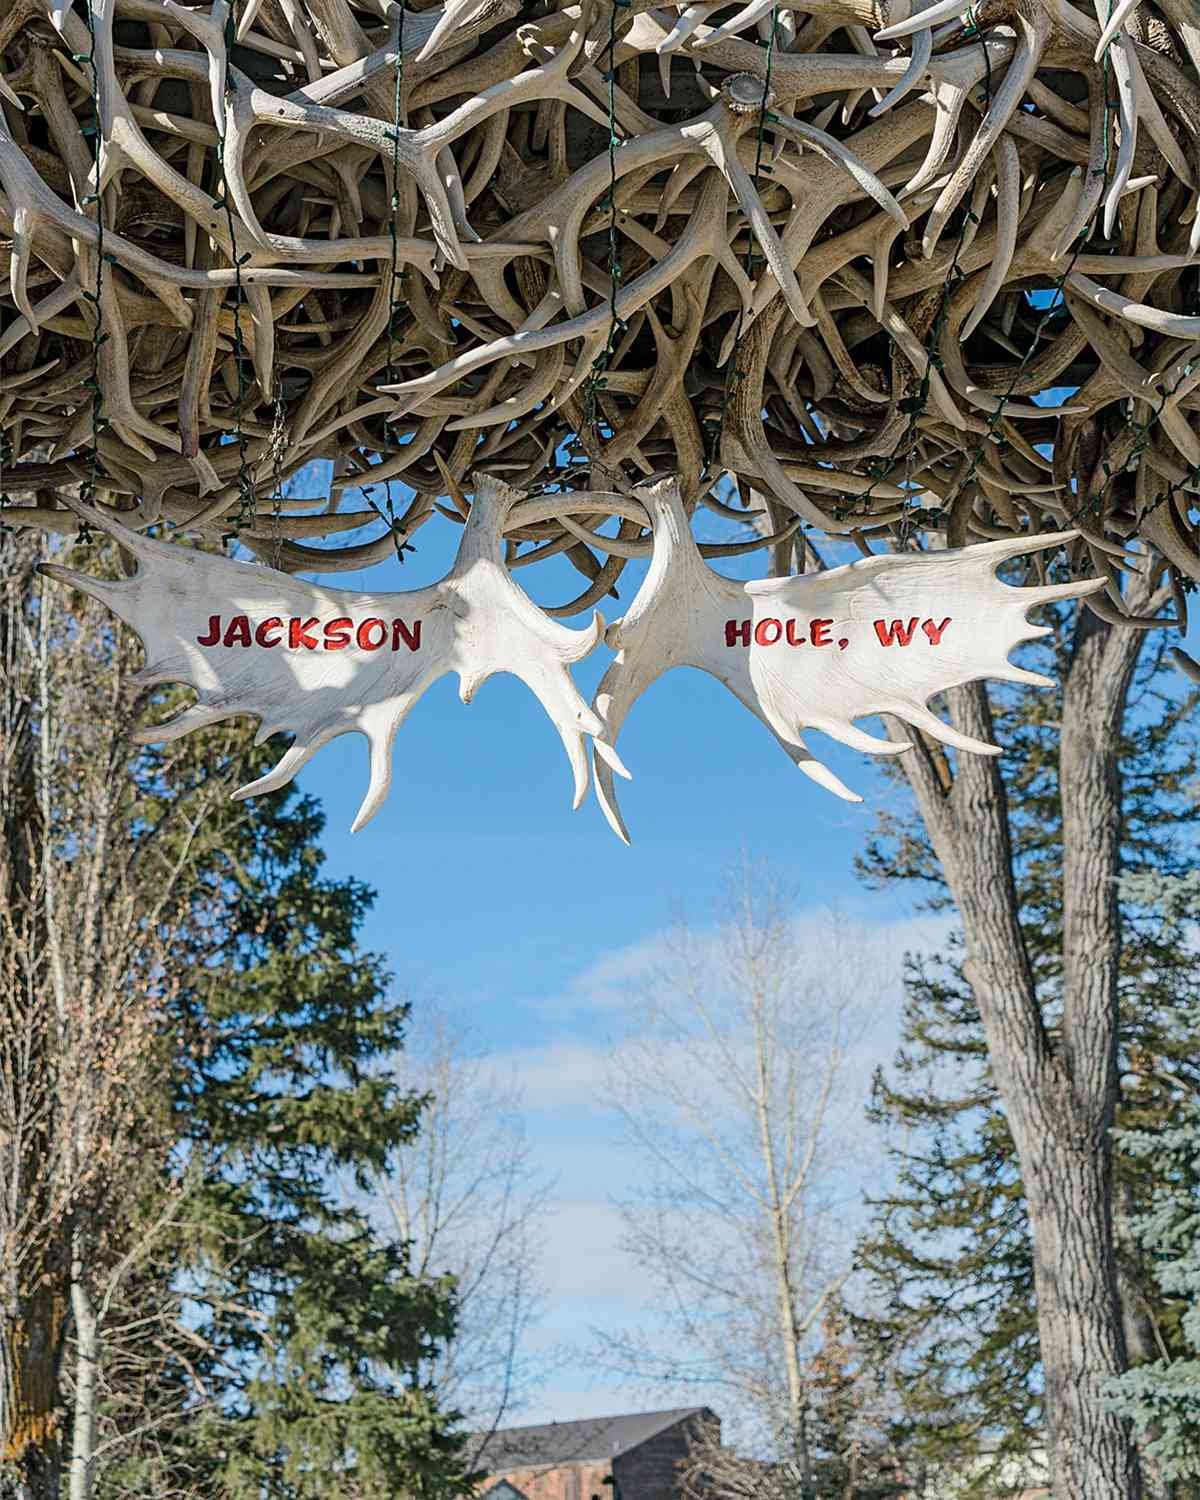 An arch made of antlers in Jackson Hole, Wyoming